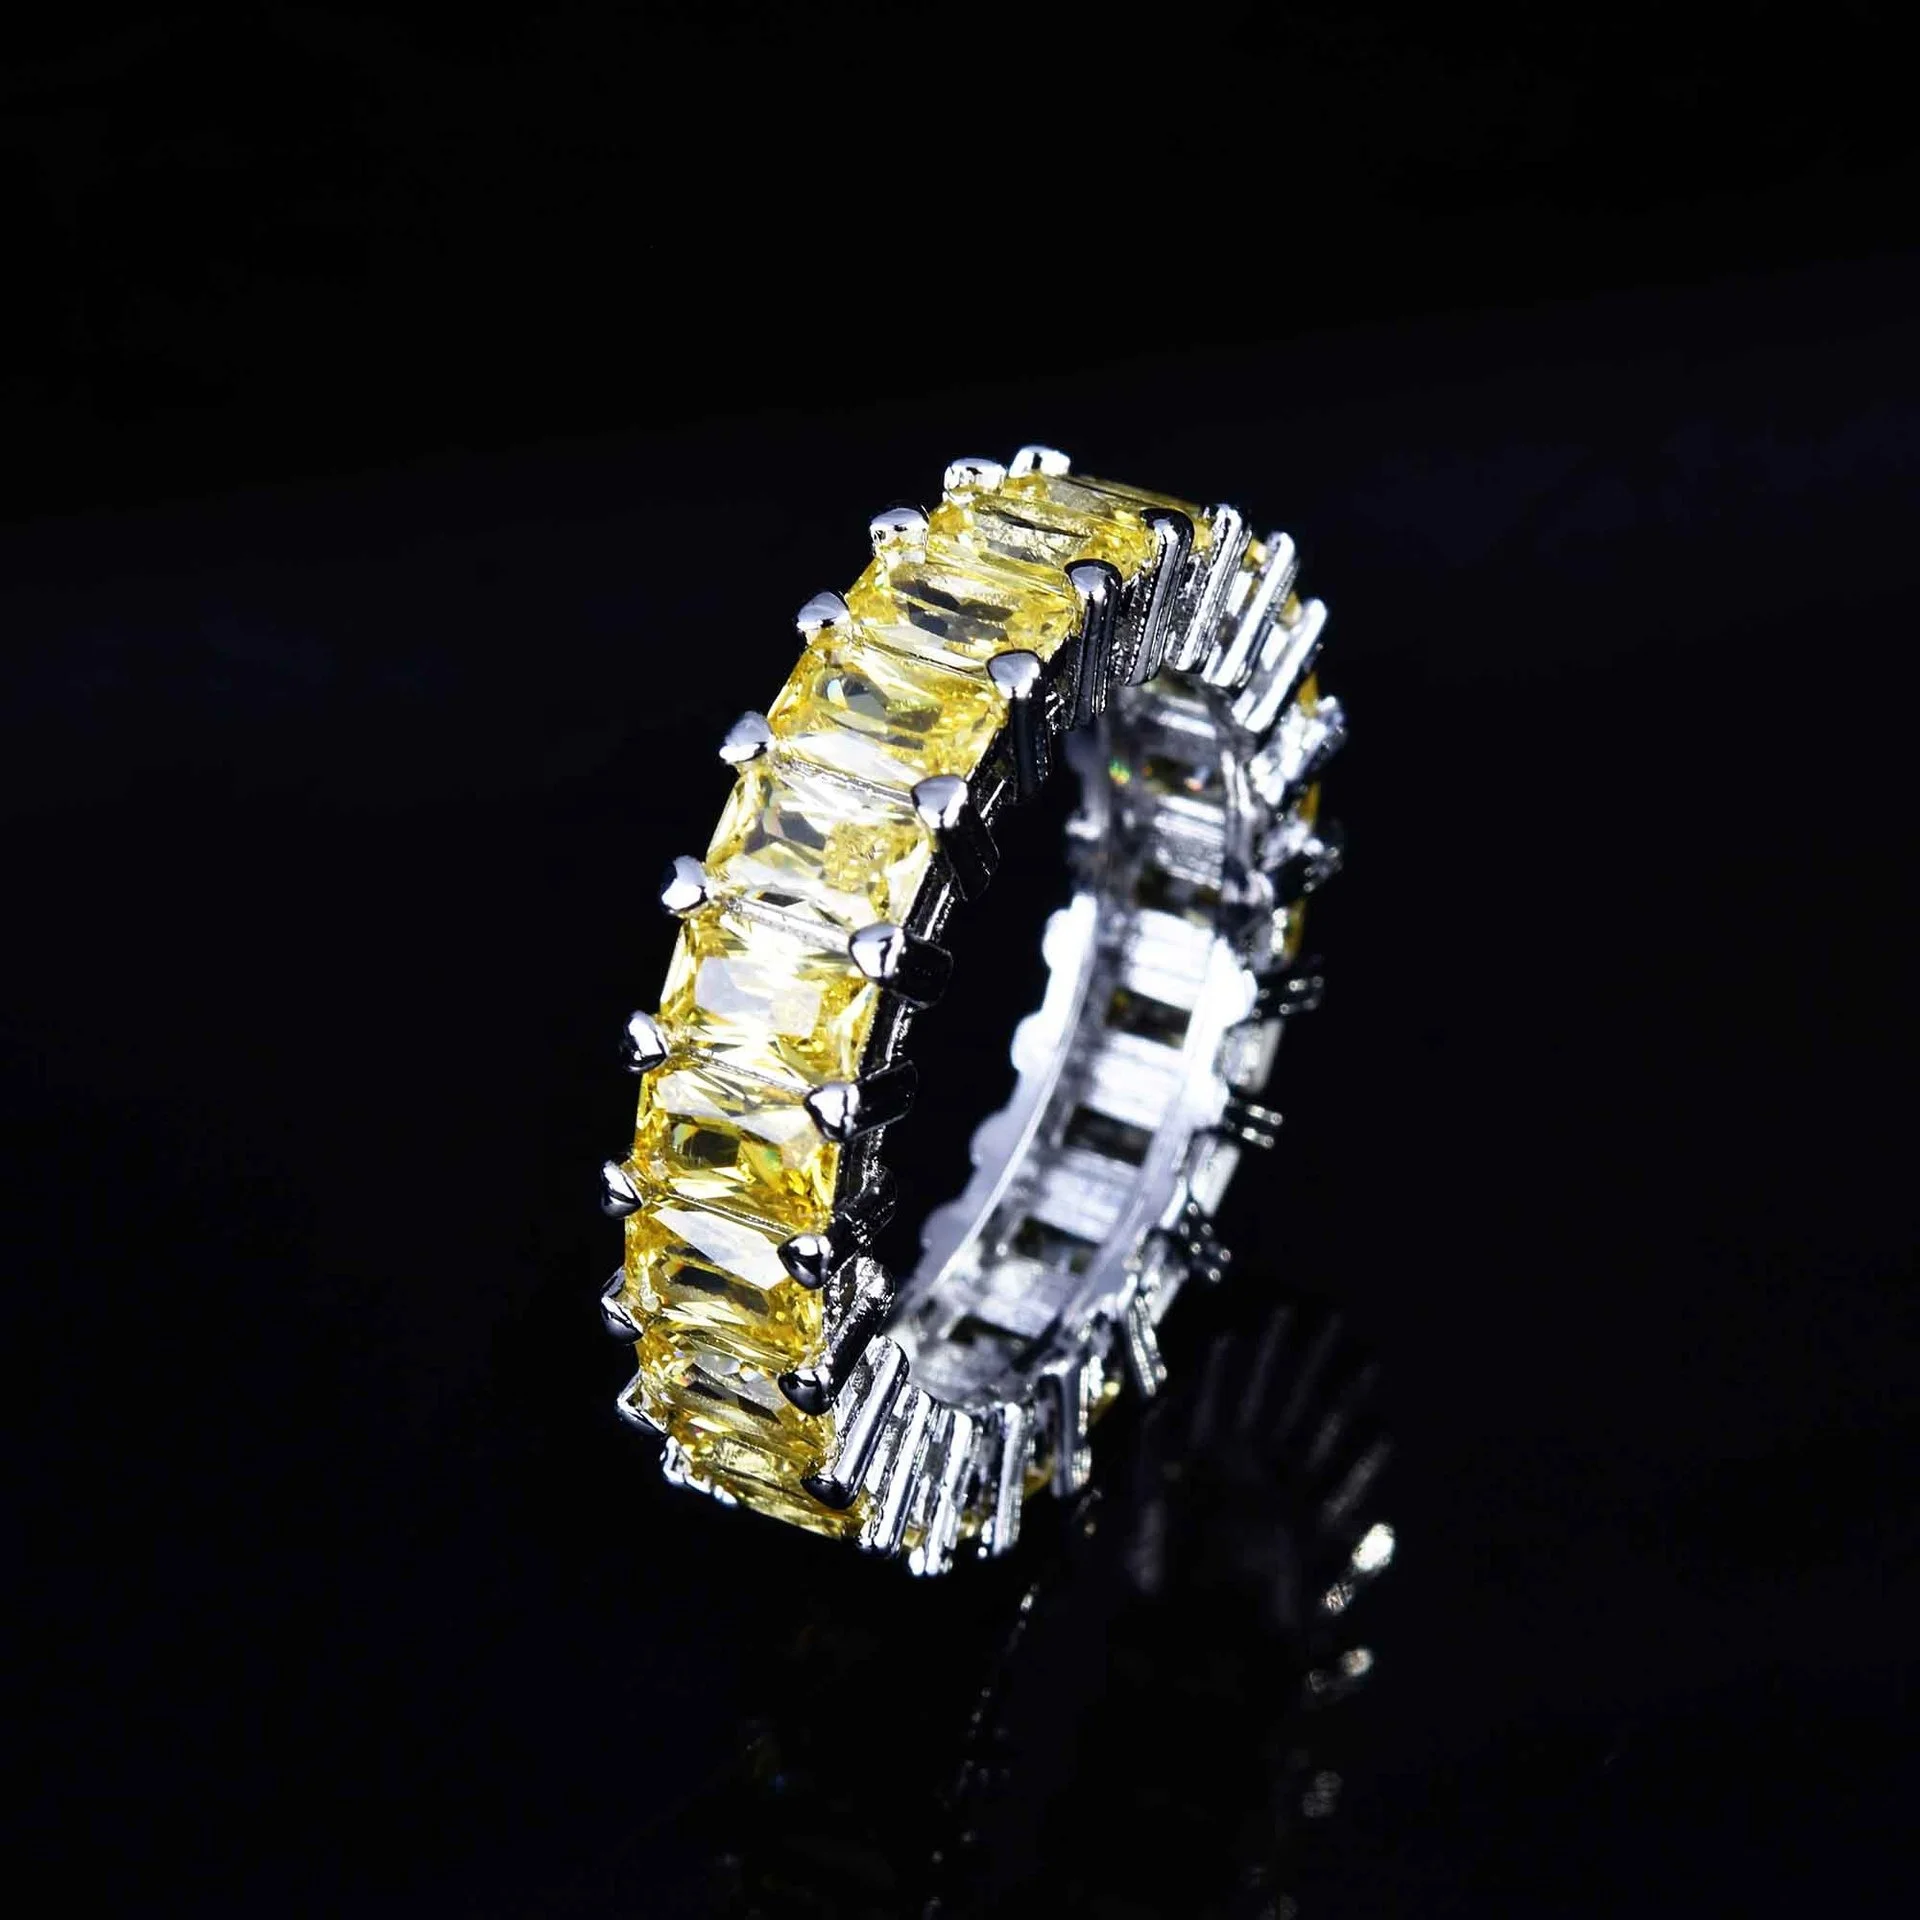 

Fashion Exquisite Rings Inlay Yellow Square Cubic Zircon Simplicity Elegant Women's Wedding Engagement Eternity Ring Gifts, Picture shows